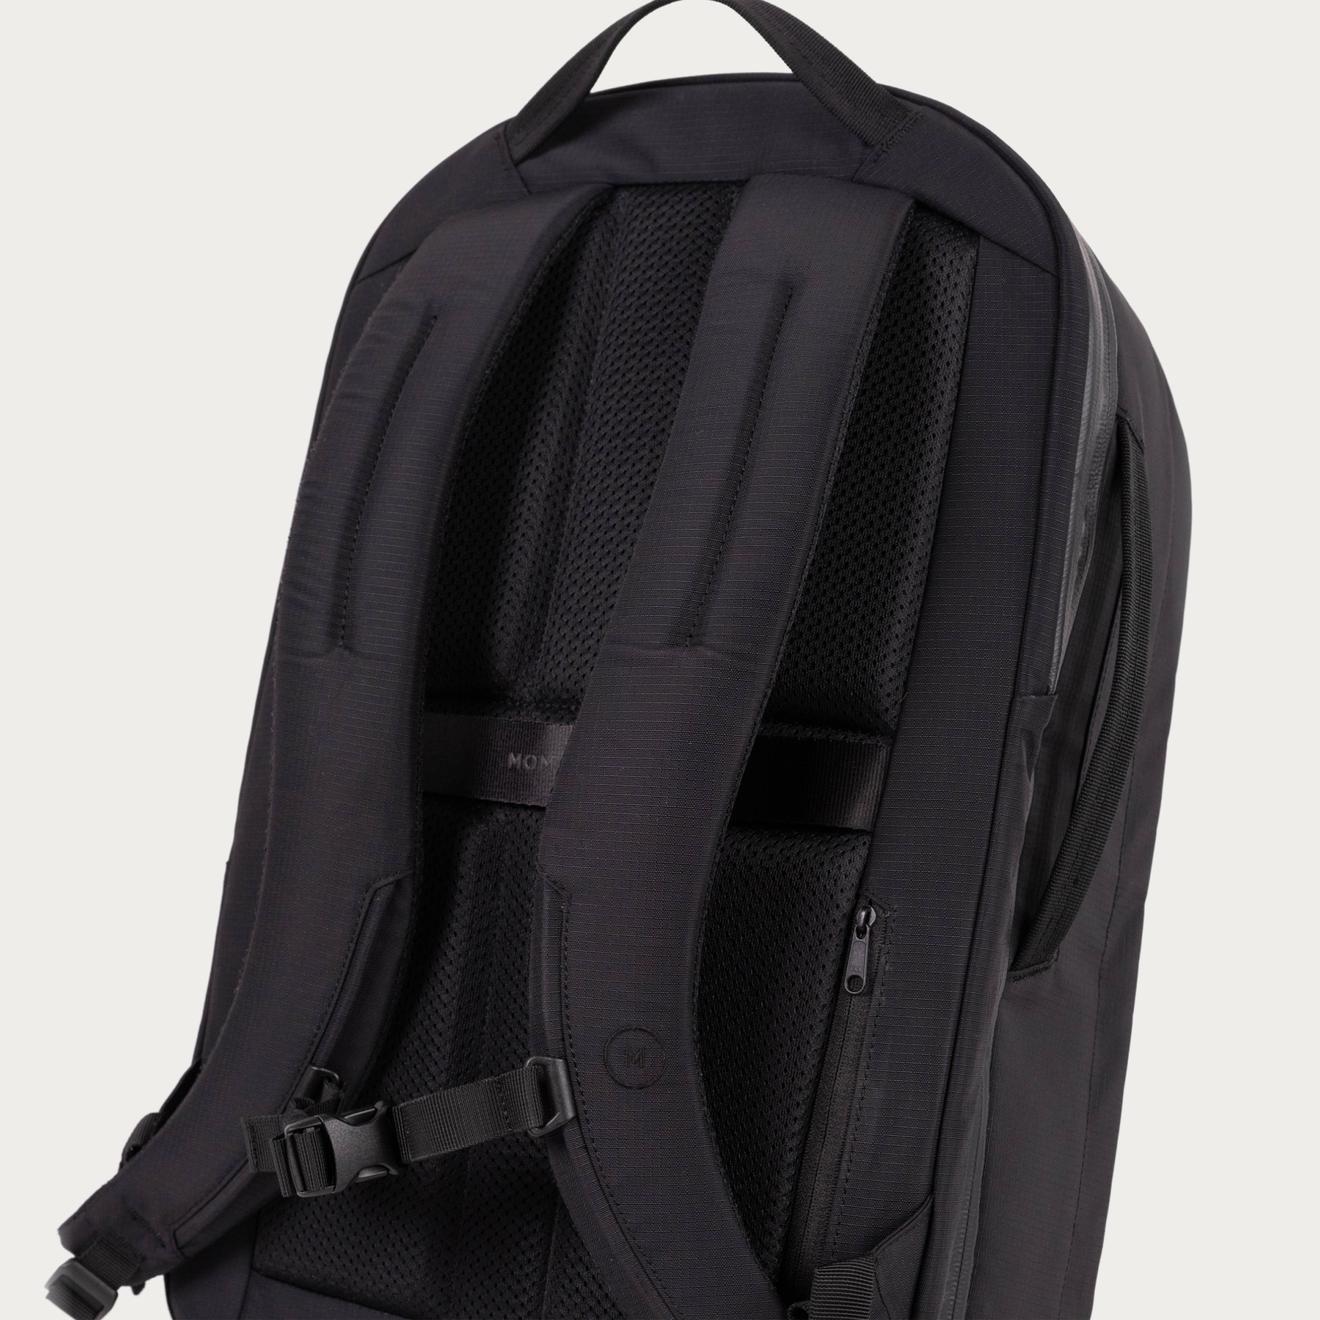 Everything Backpack 28L